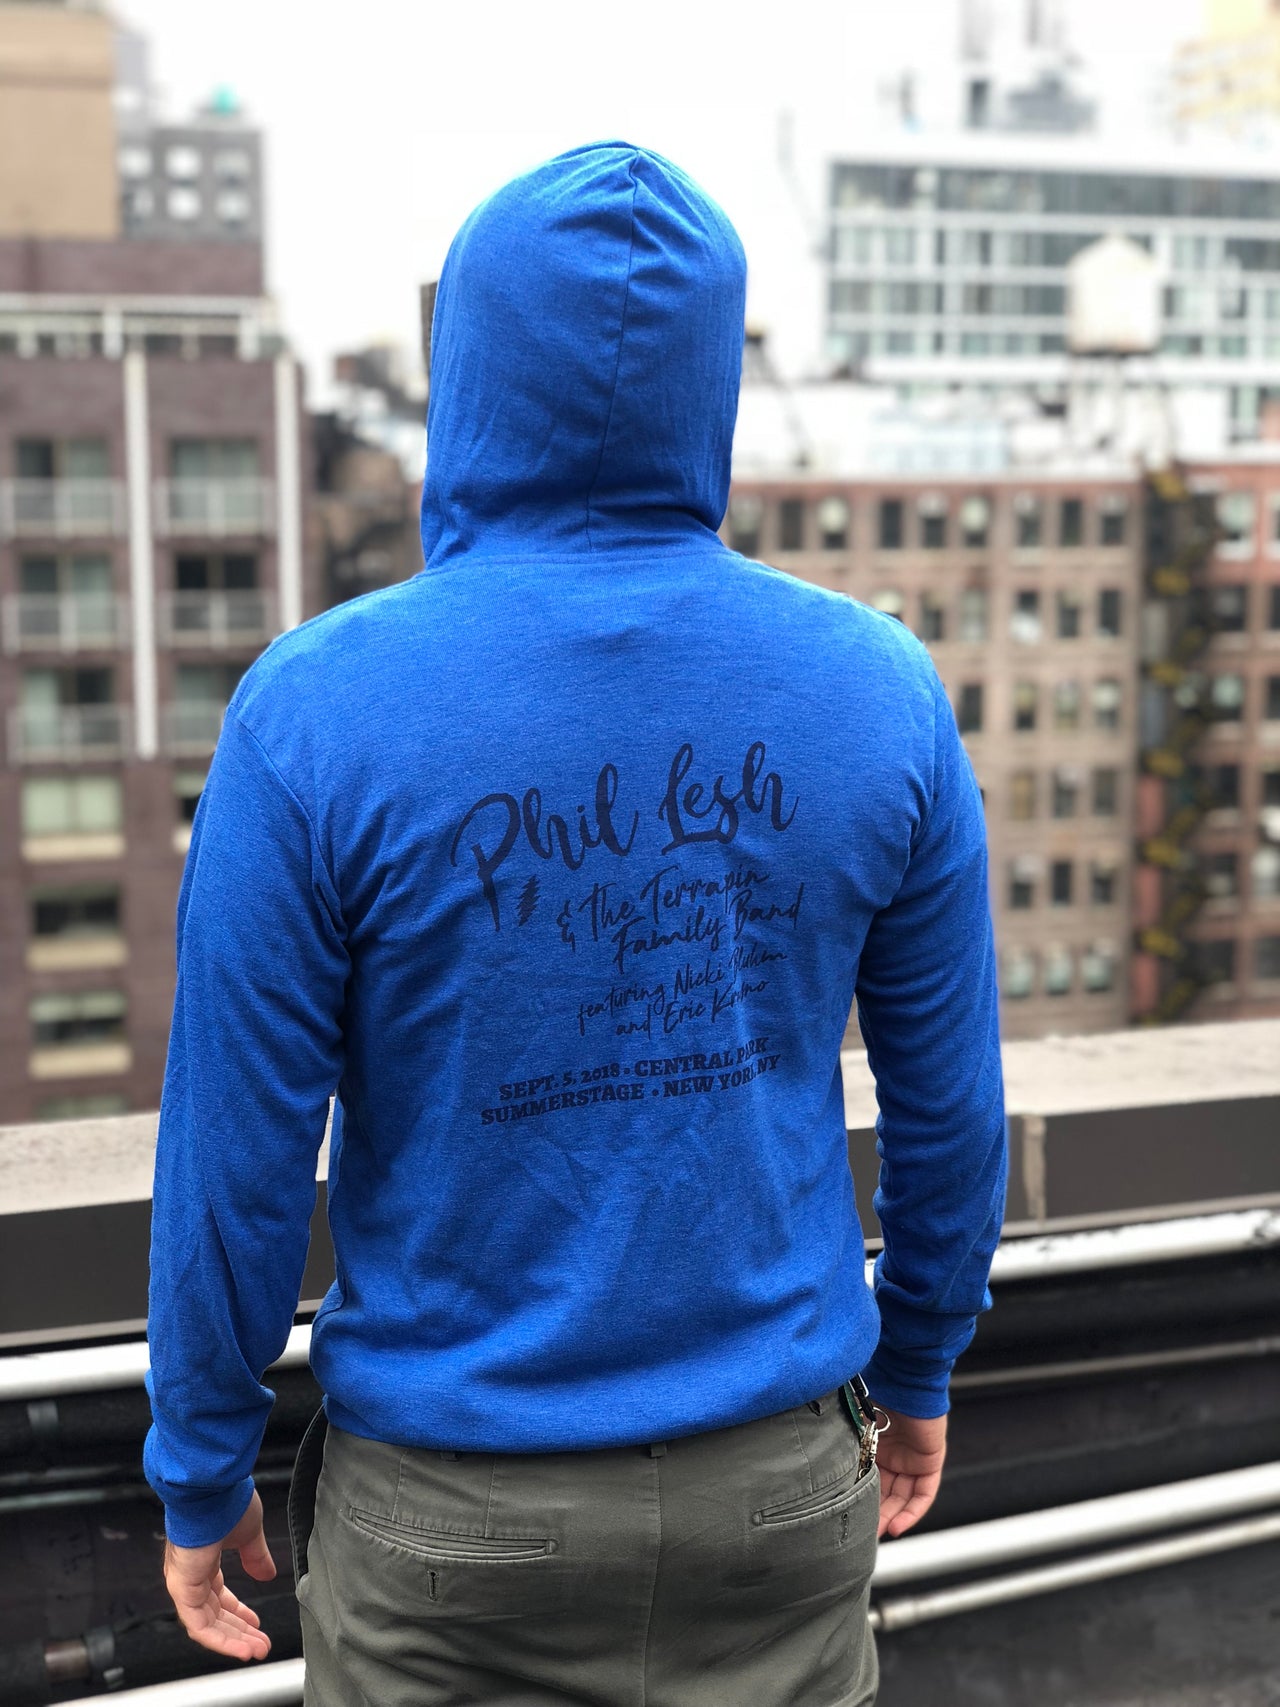 Phil Lesh in Central Park - Limited Edition 2018 Hoodie